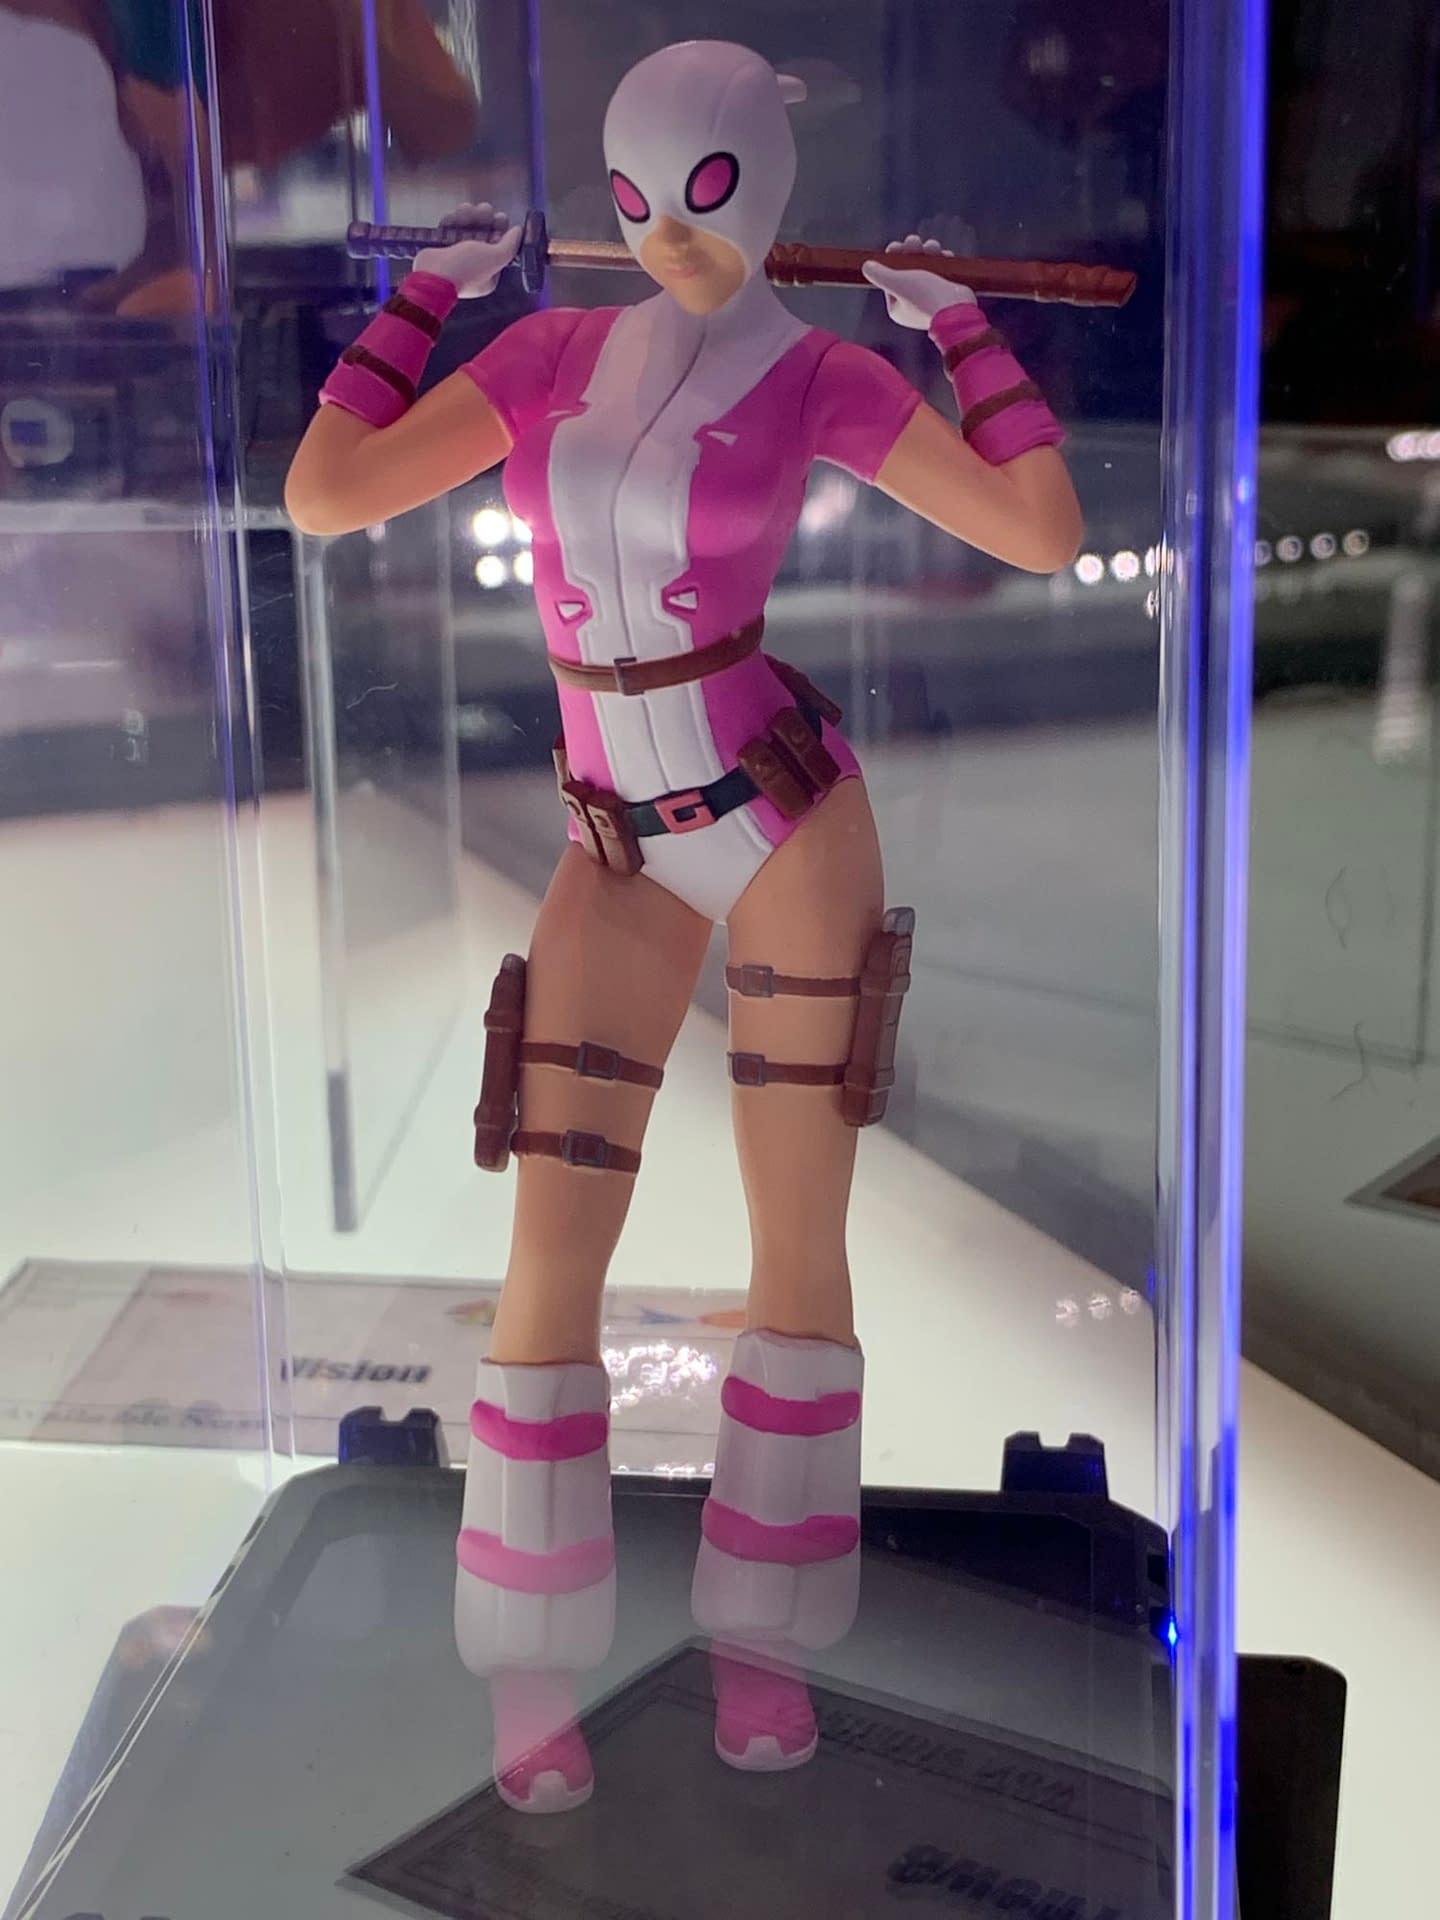 New York Toy Fair: 15 Photos from Storm Collectibles Booth